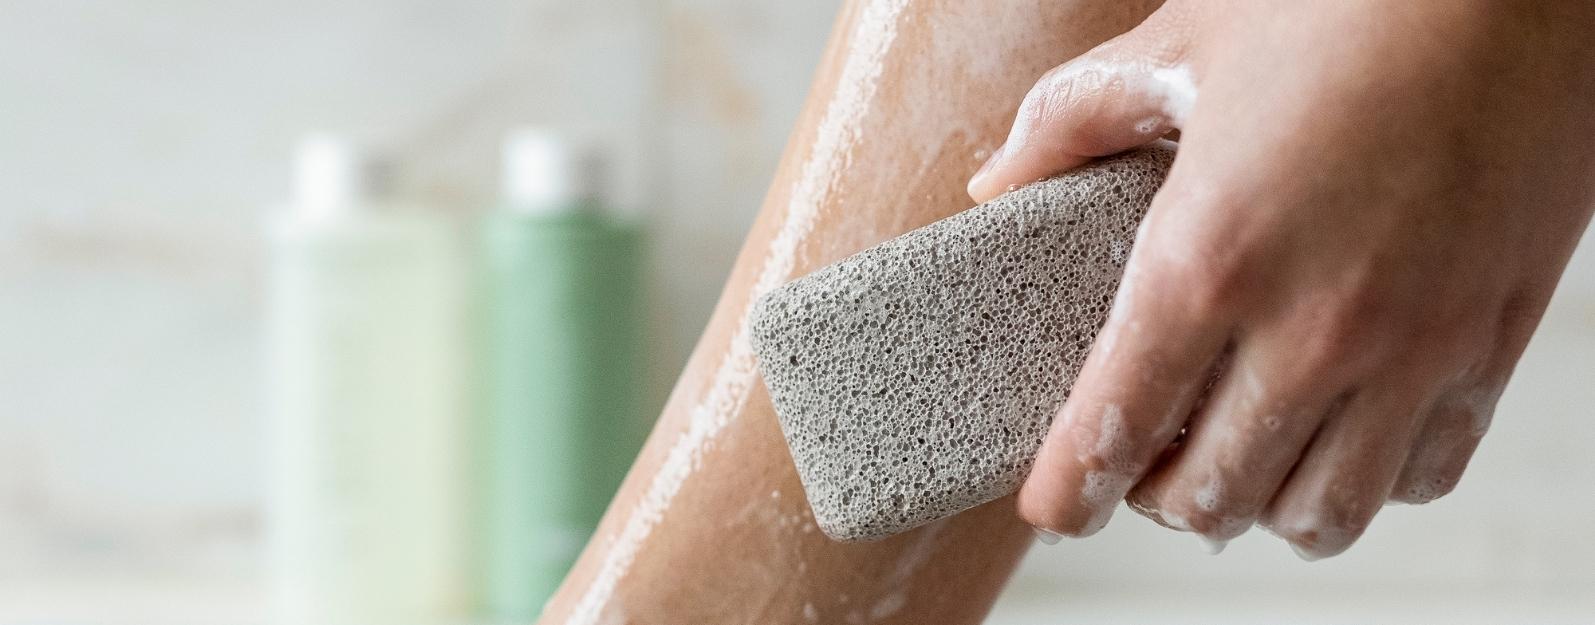 The Body Rock Pumice Stone for Exfoliating